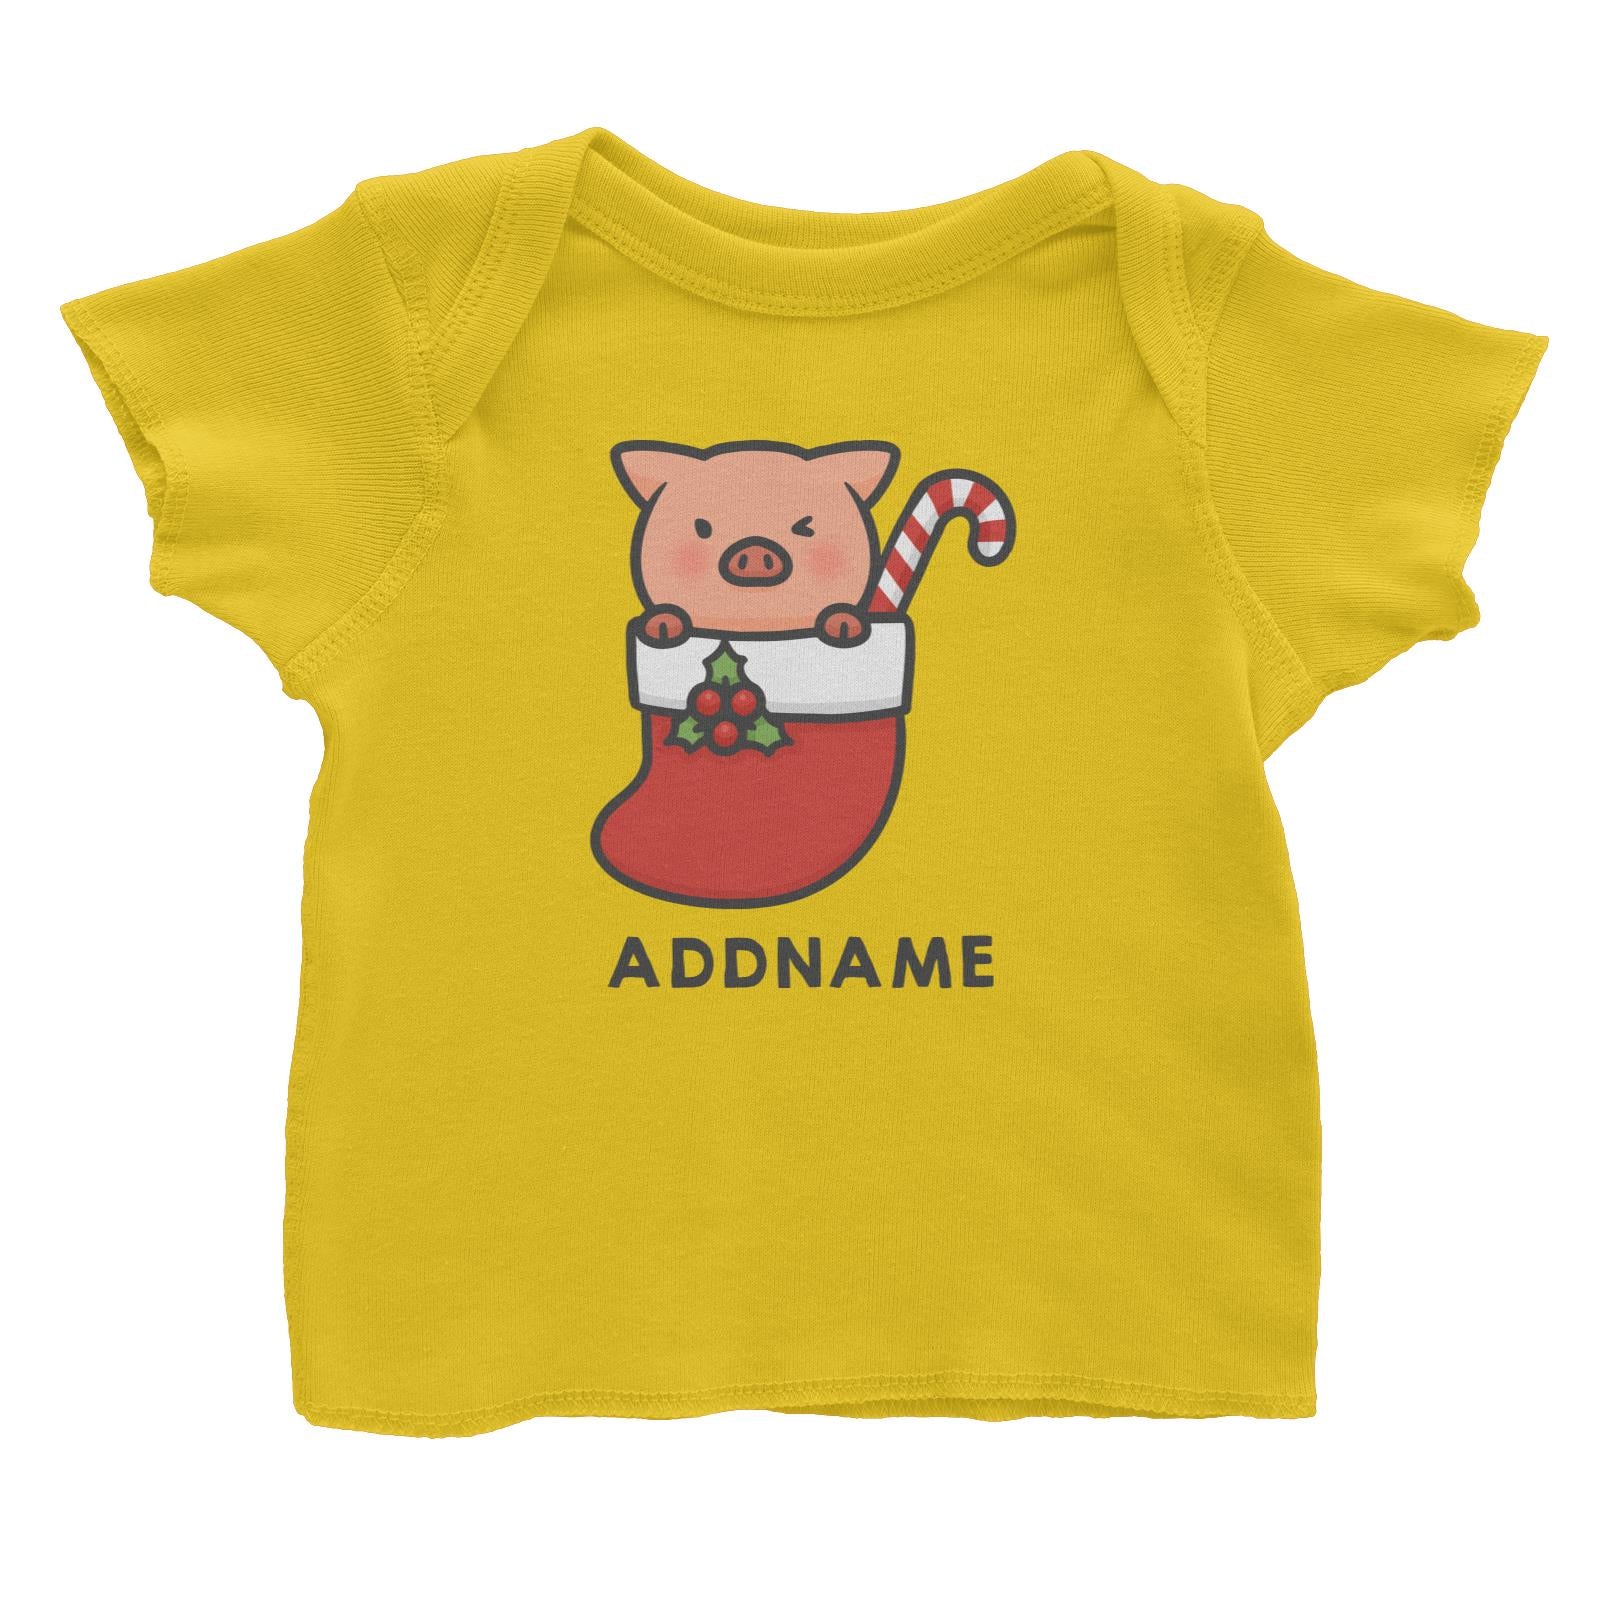 Xmas Cute Pig In Christmas Sock Addname Accessories Baby T-Shirt